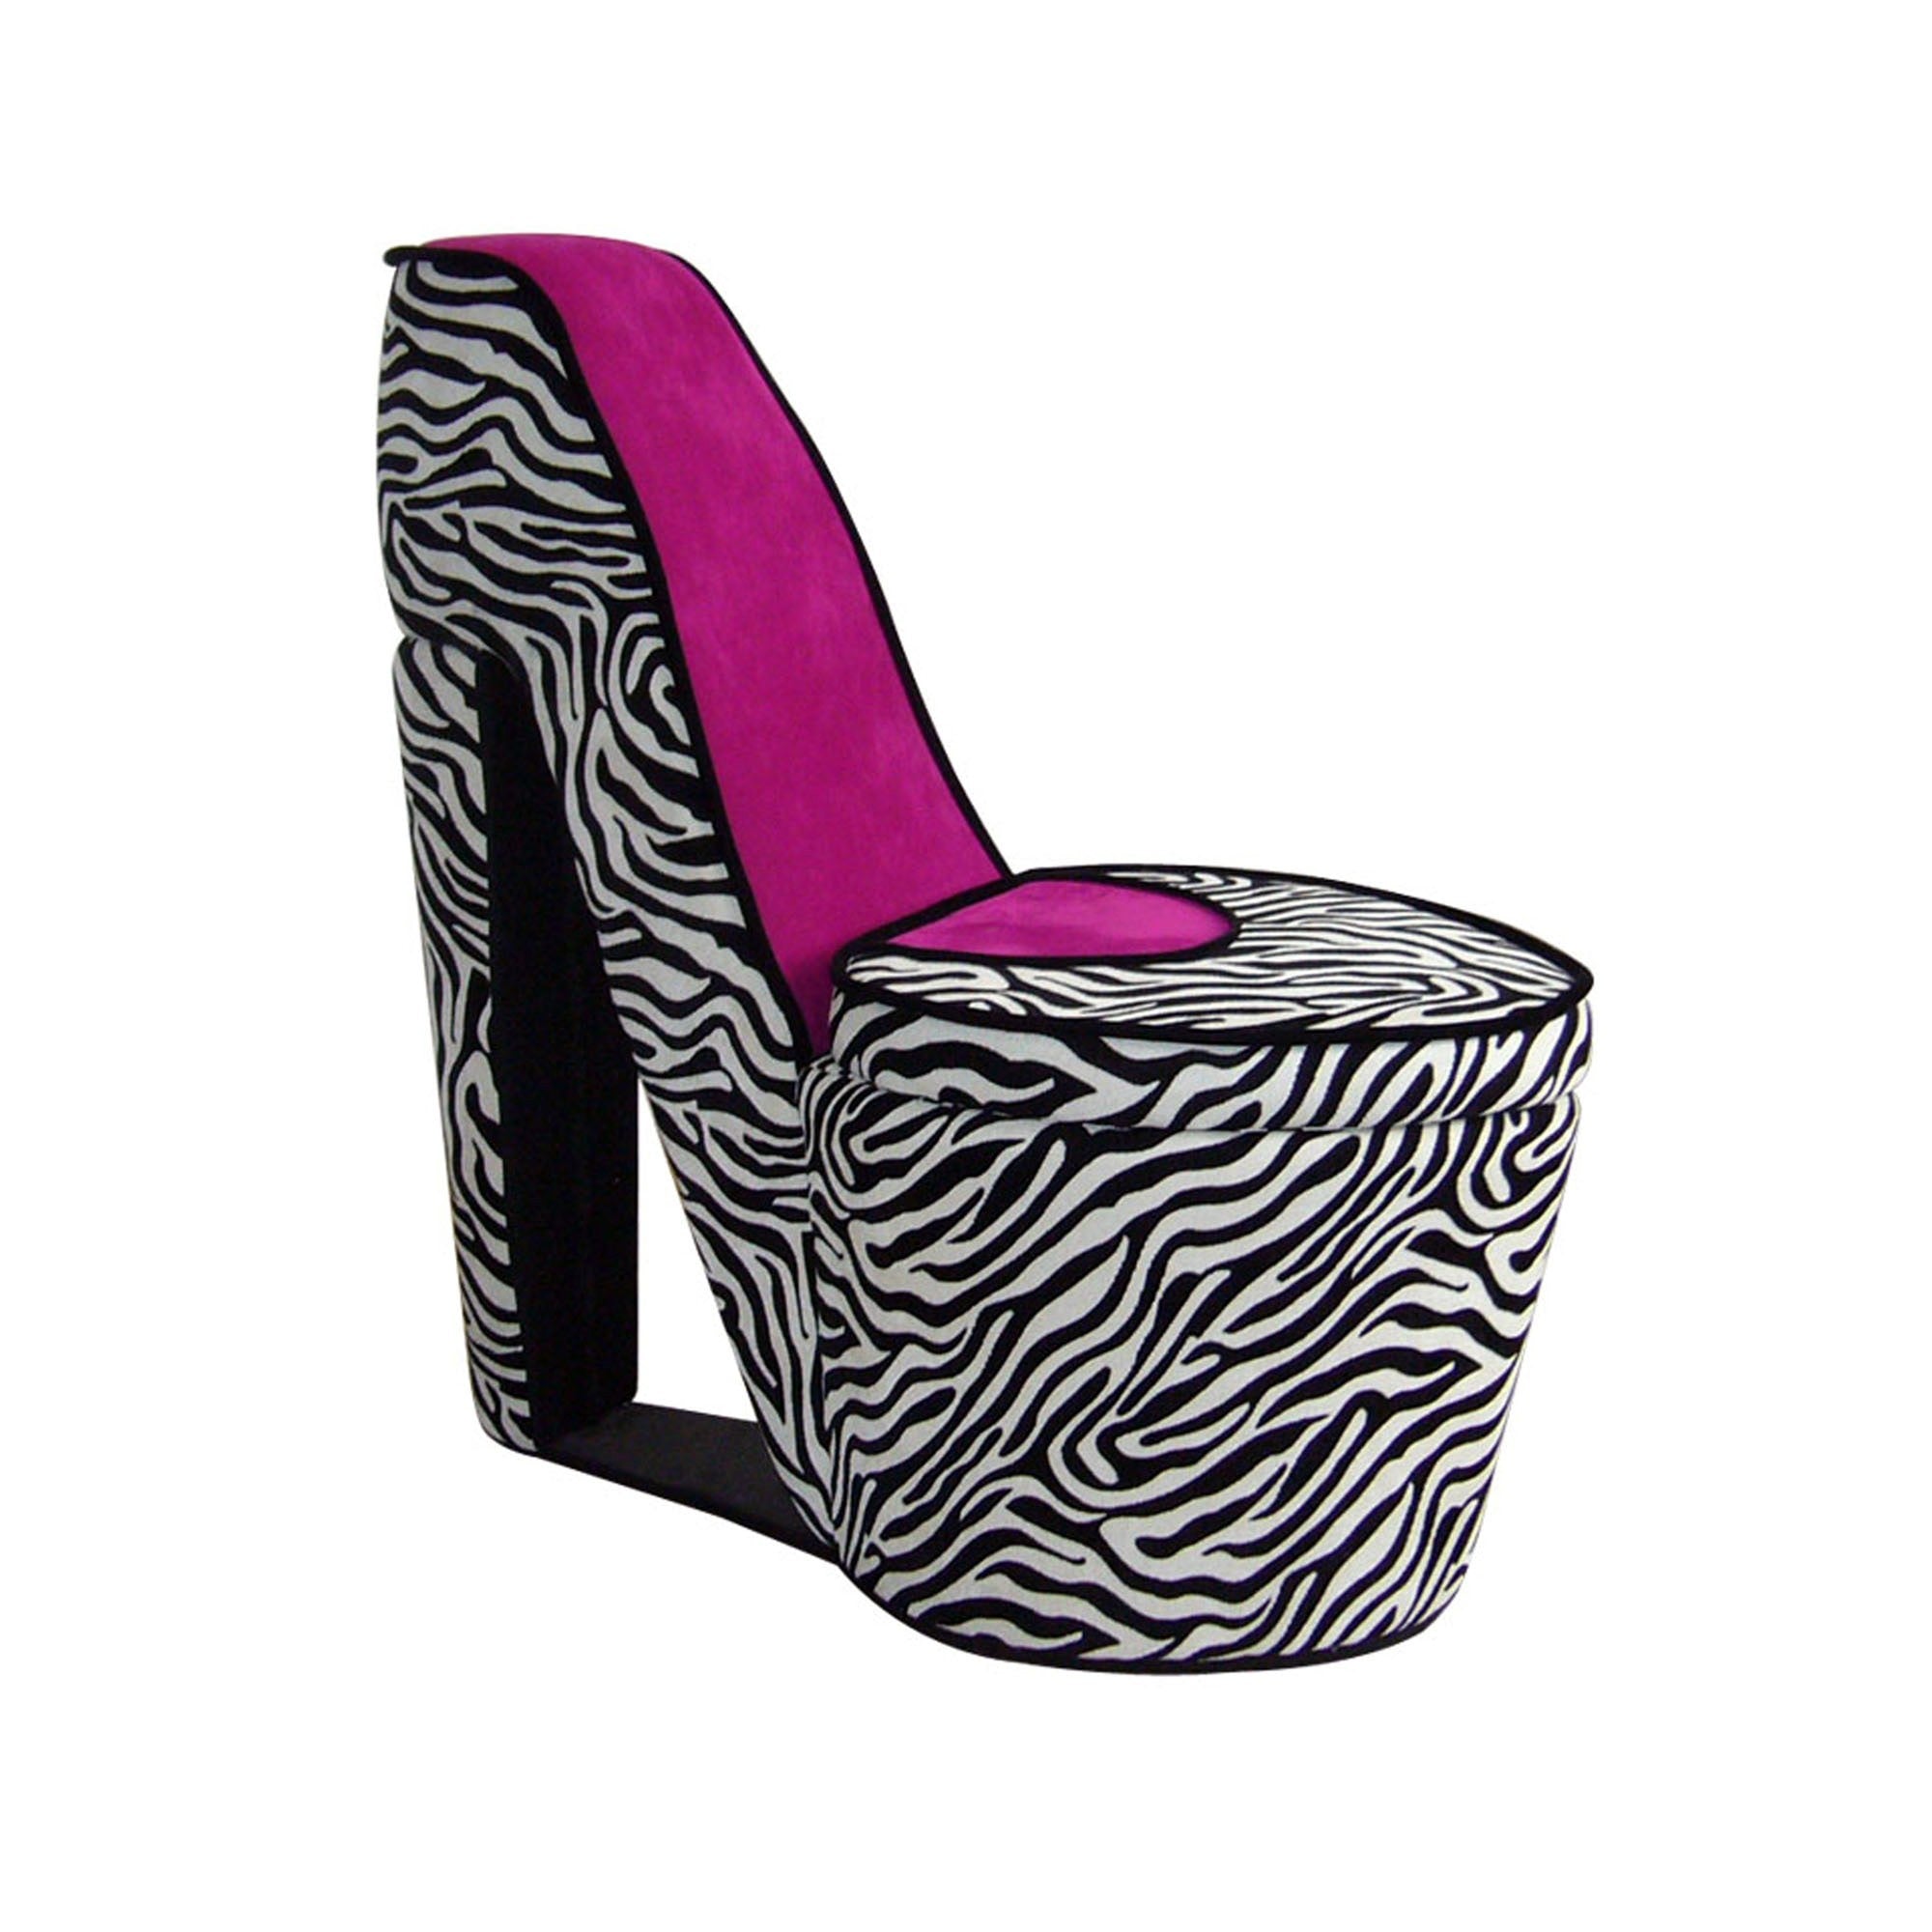 32" Black And White Faux Suede Animal Print Side Chair